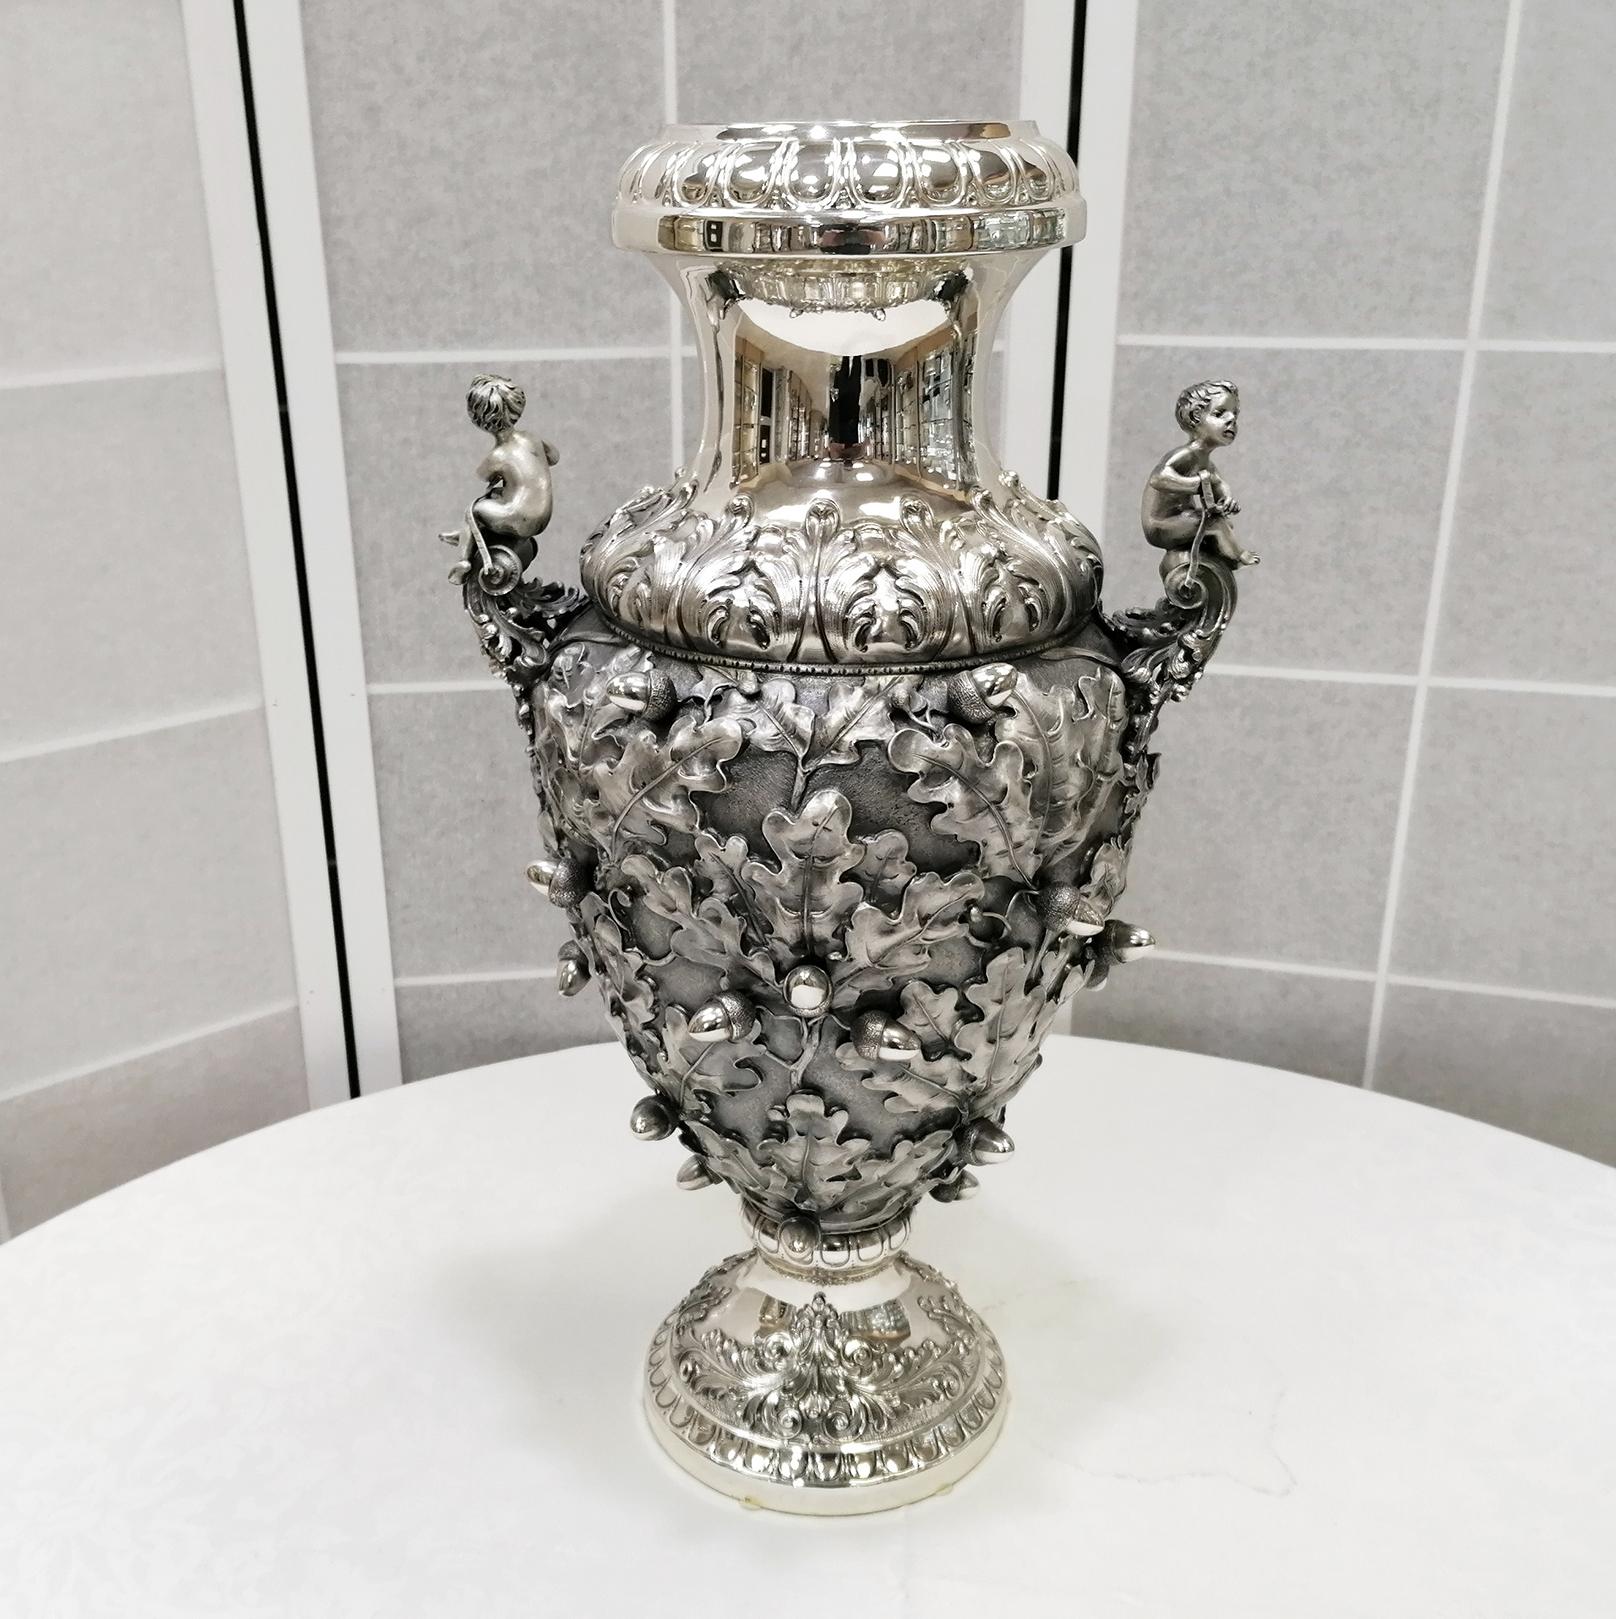 Wonderful big vase with shaped round body embossed, chiselled and engraved with oak leaves.
On the body are soldered melting made acorns
Above the handles are placed two children.
The round base is also embossed and chiselled

The maker was a